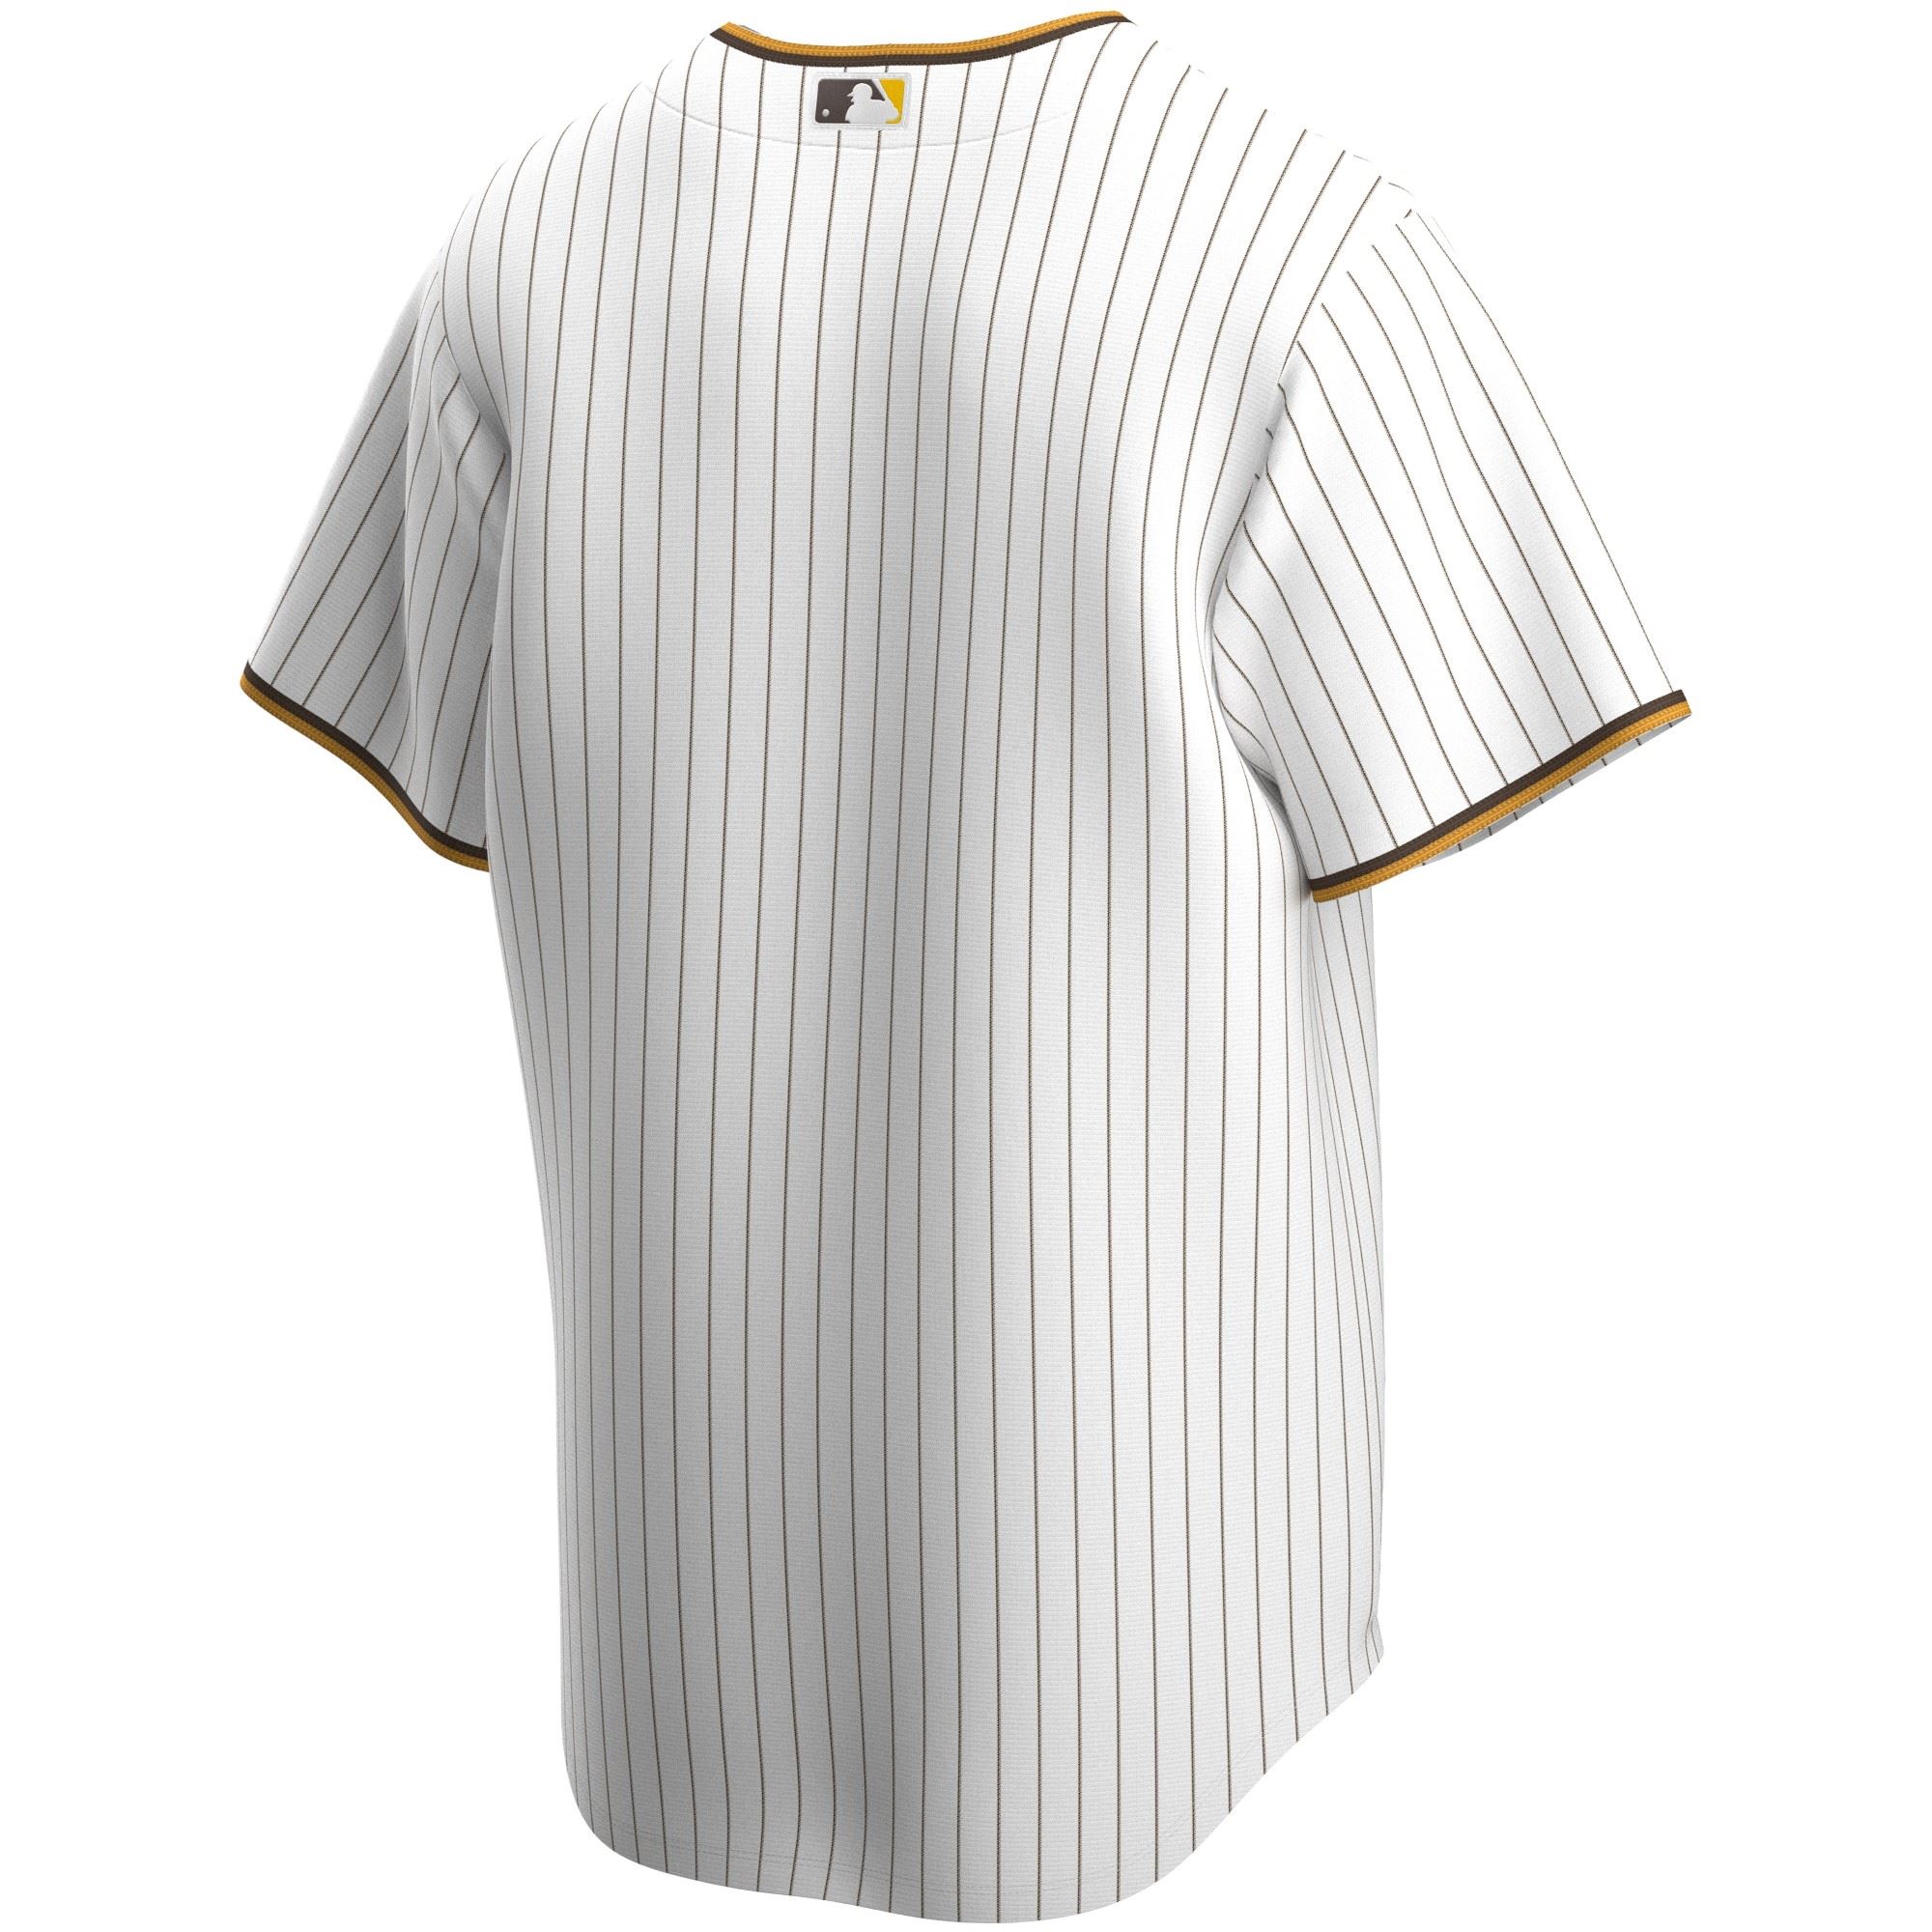 San Diego Padres Official MLB Replica Home Jersey White Nike